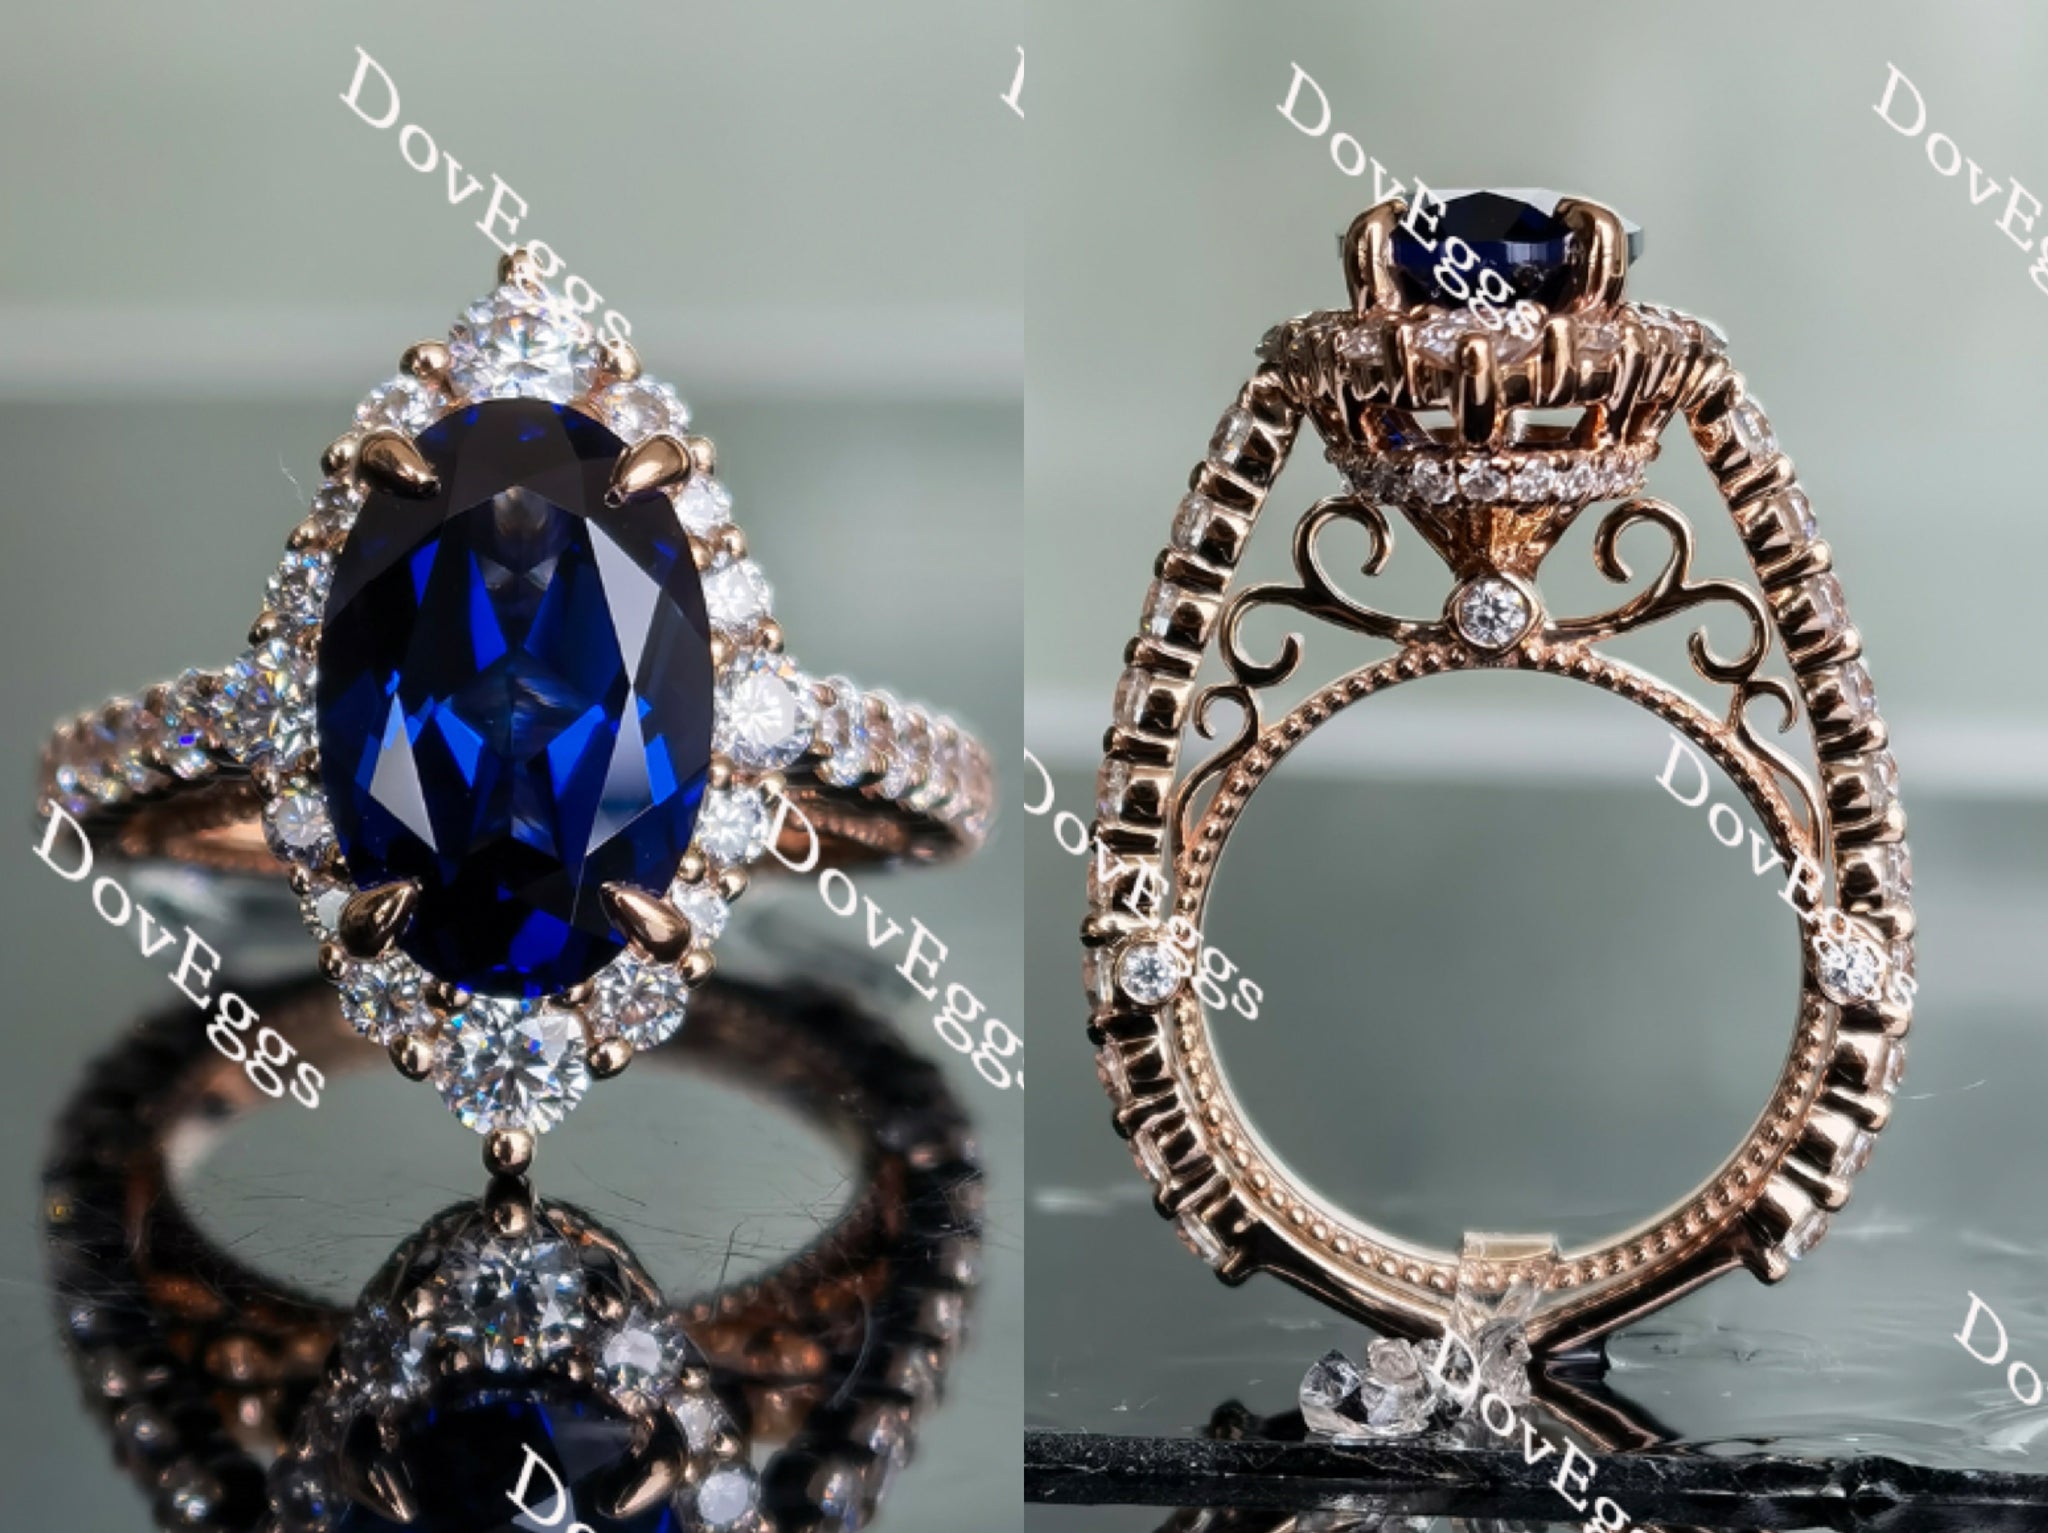 Doveggs floral halo elongated oval intense royal blue sapphire ring